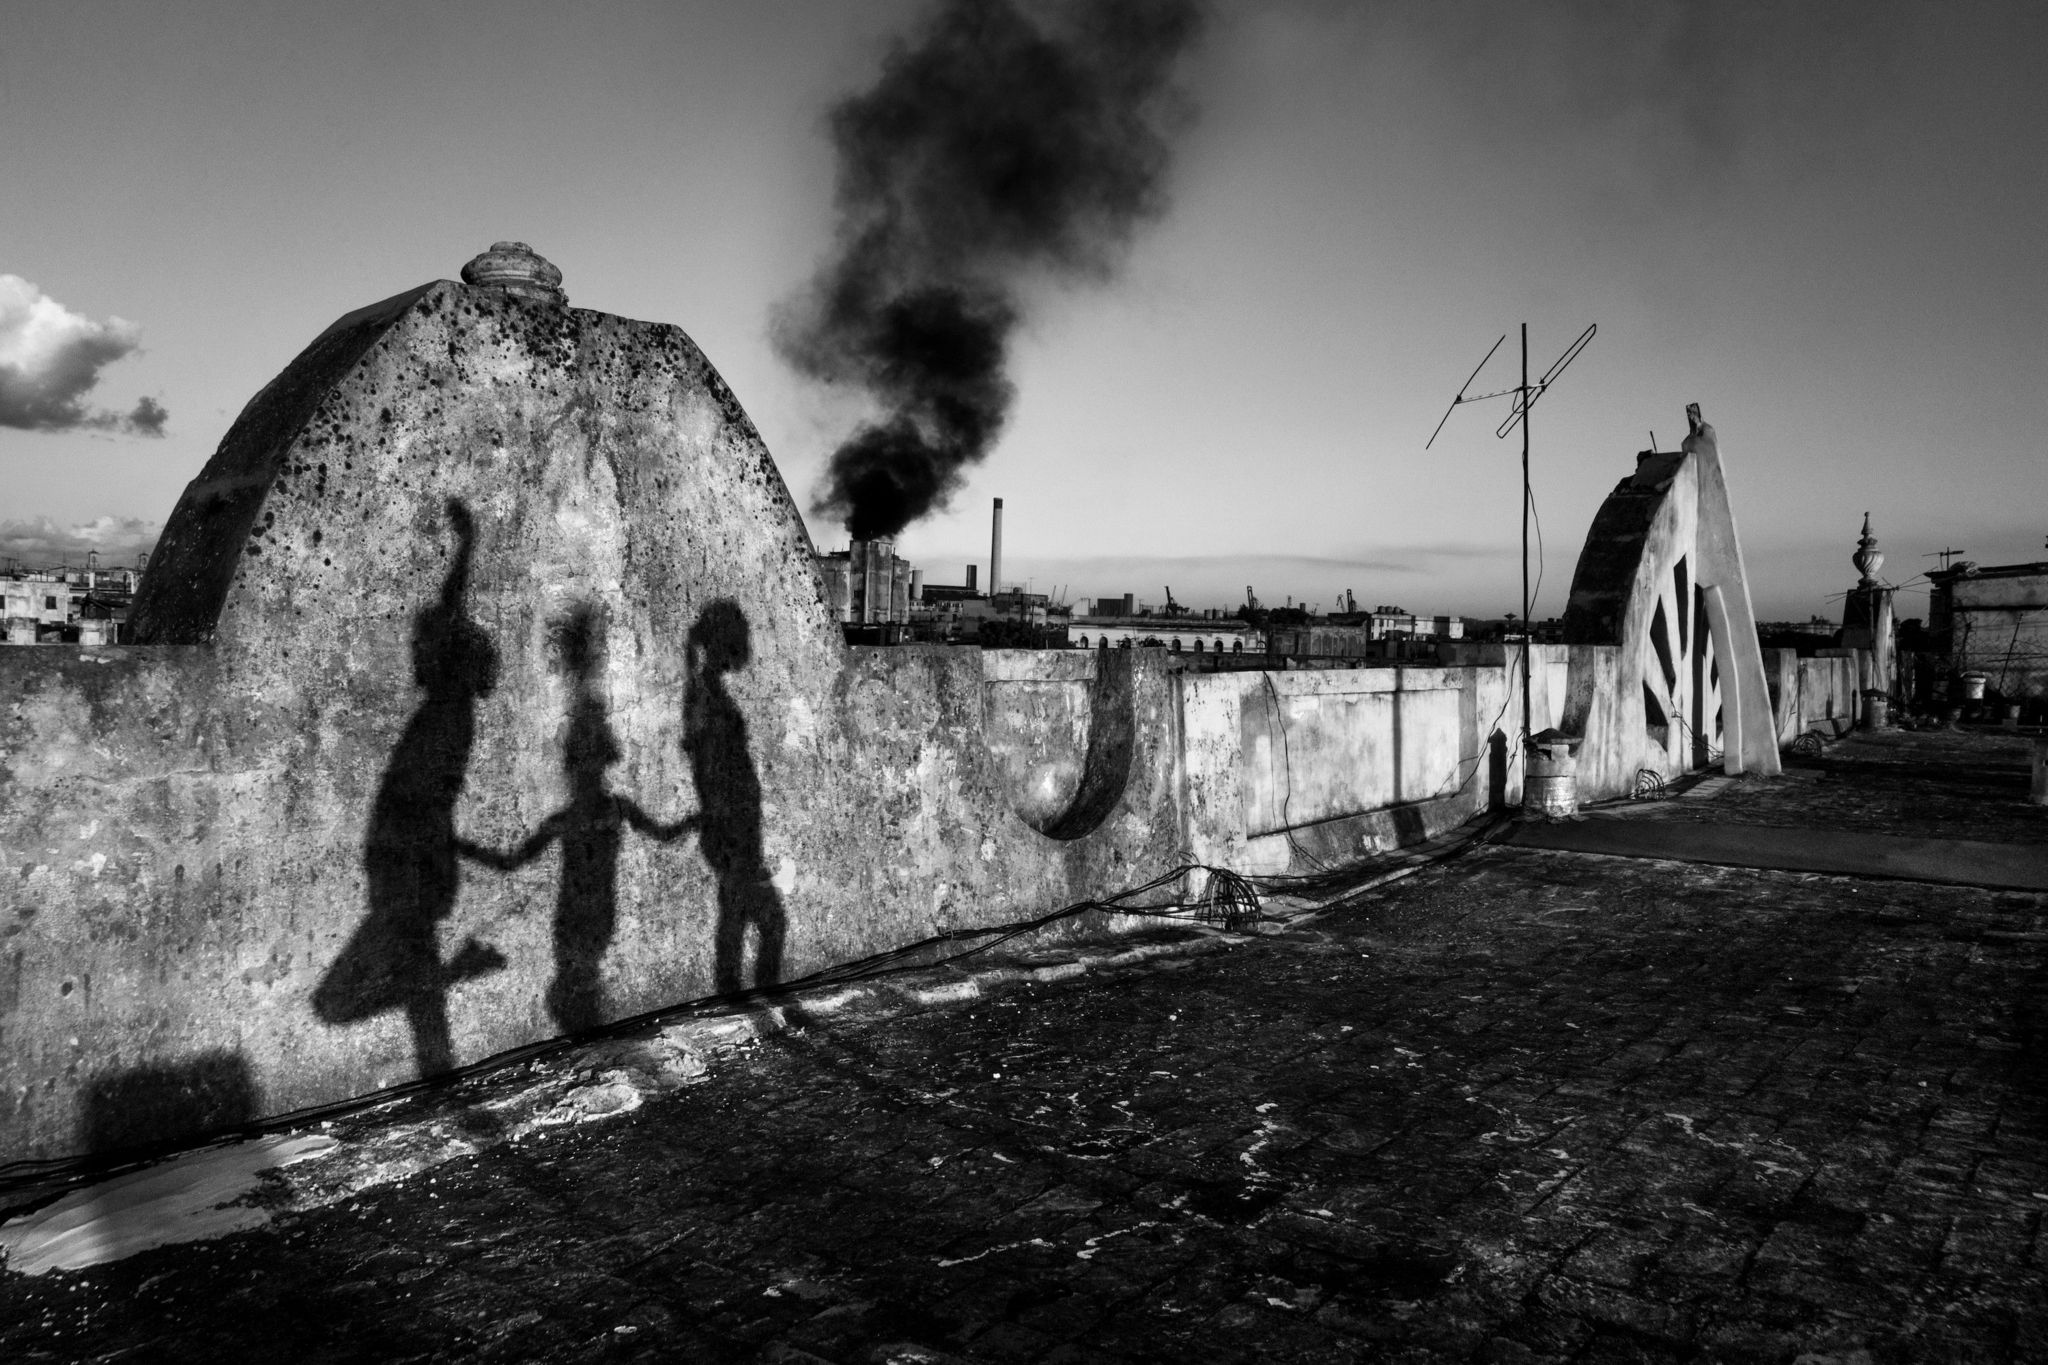 The shadows of children on a wall in Havana, Cuba